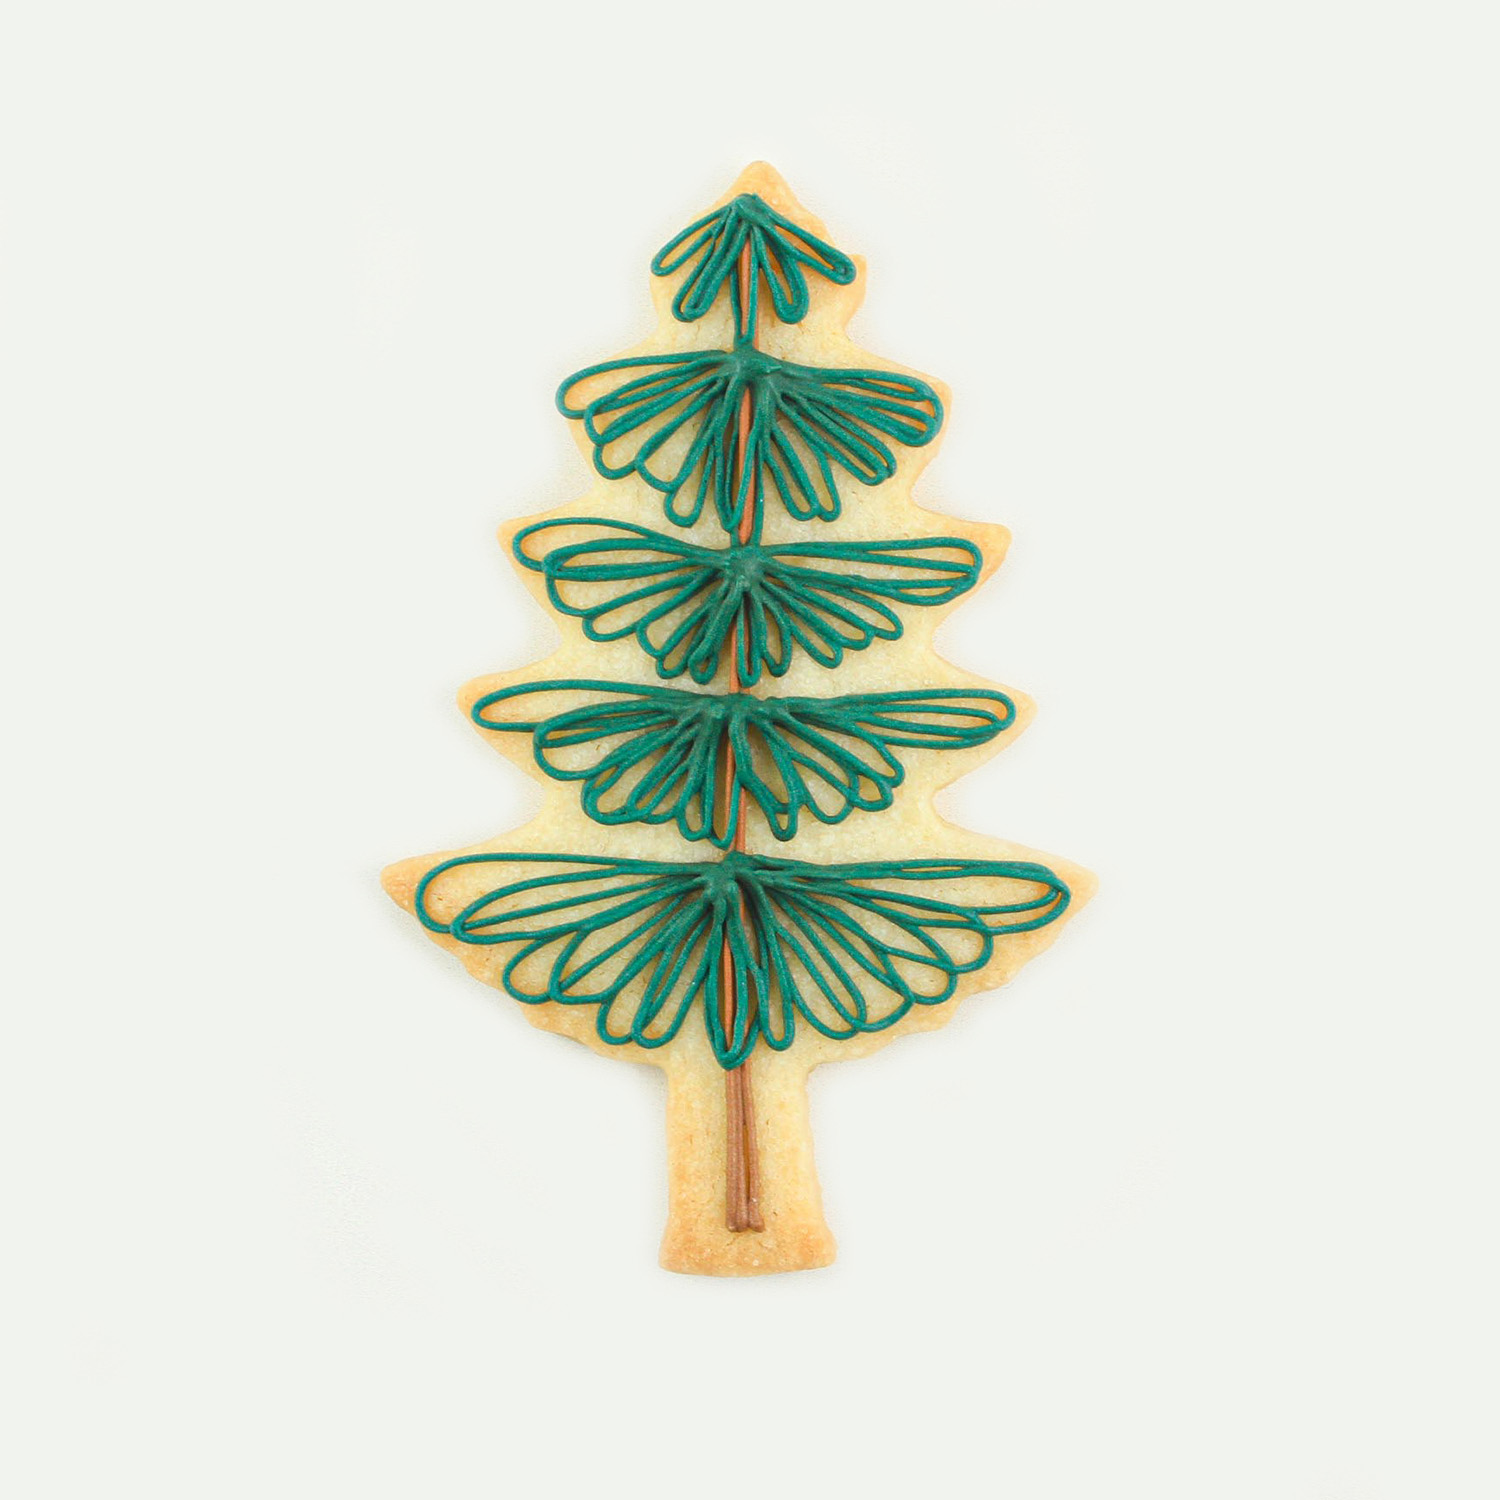 Pine Tree Cookie decorated with loops of green royal icing for the leaves